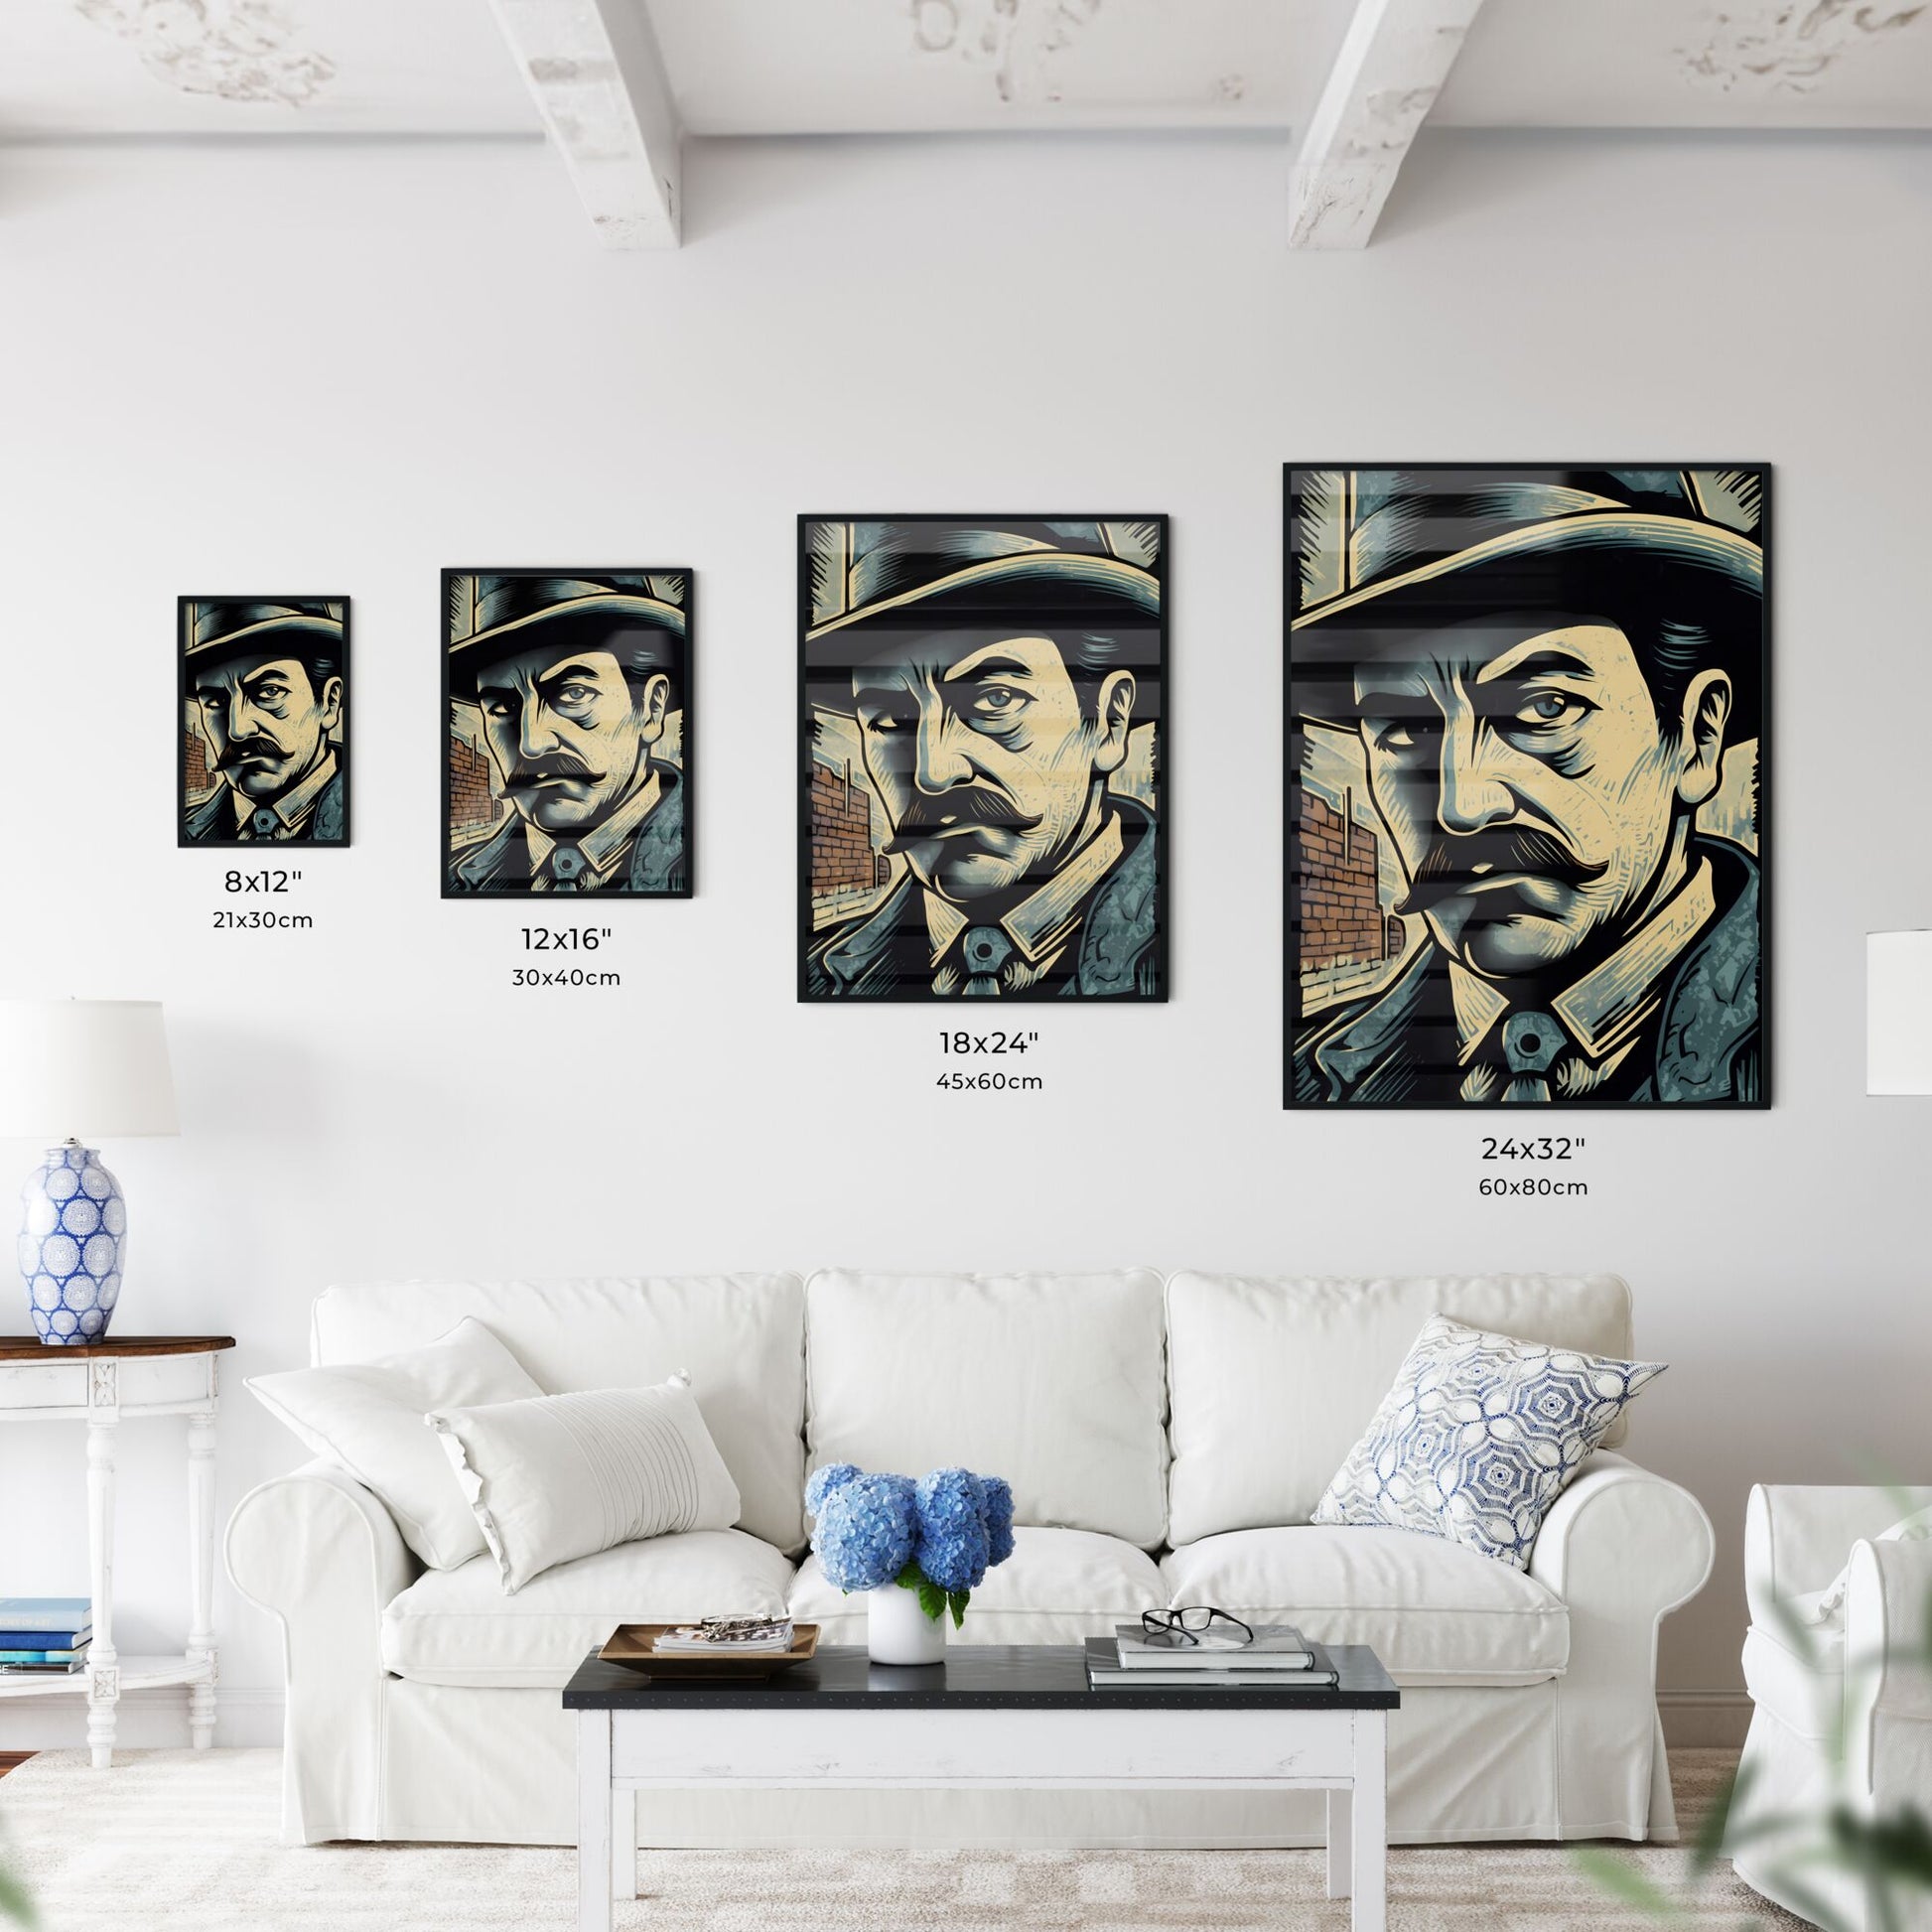 A Poster of early 20th-centry poster-style linocut - A Man With A Mustache Wearing A Hat Default Title